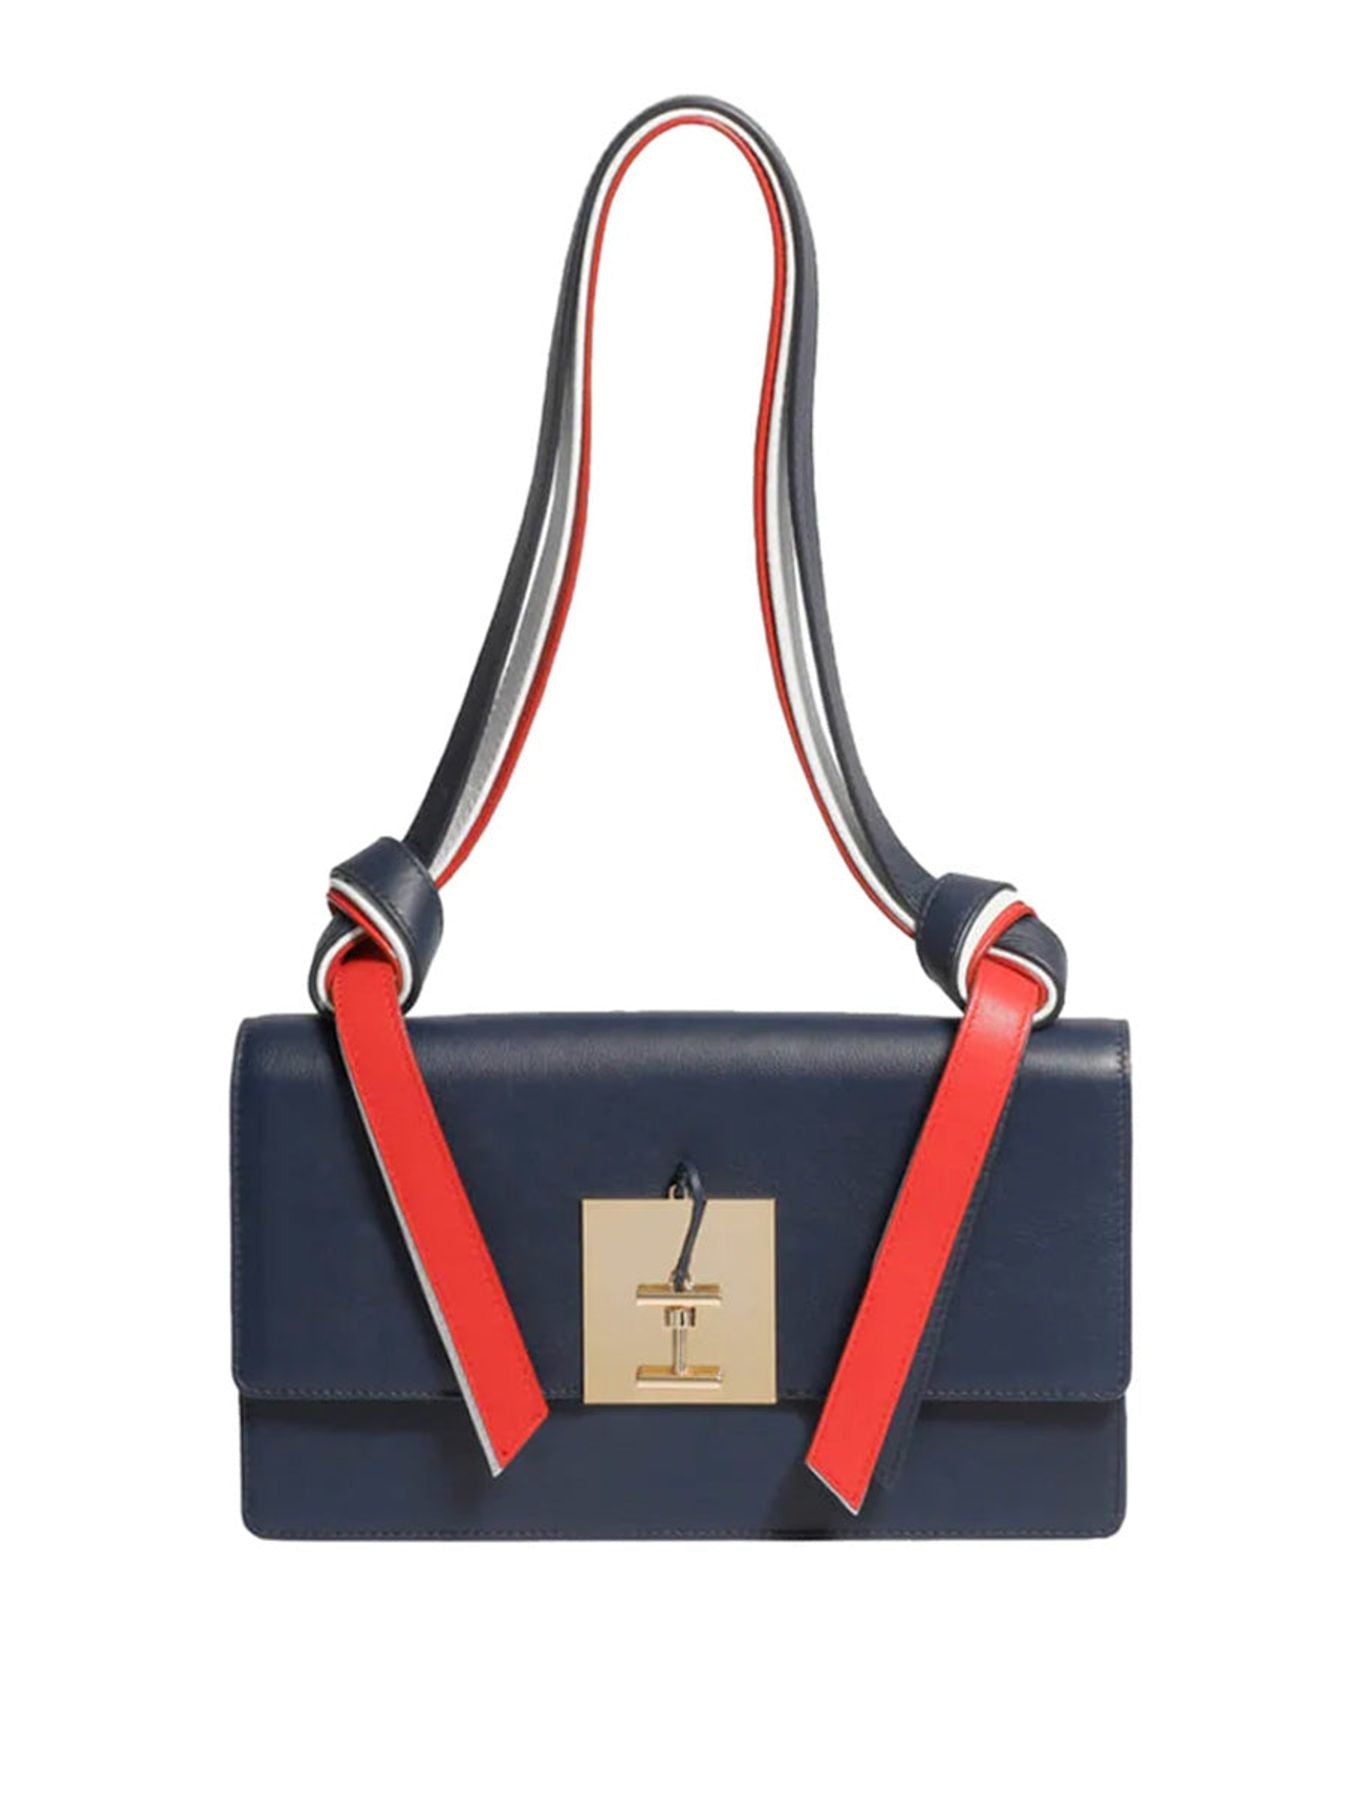 bag-beatrice-wand-leather-marine-tricolor